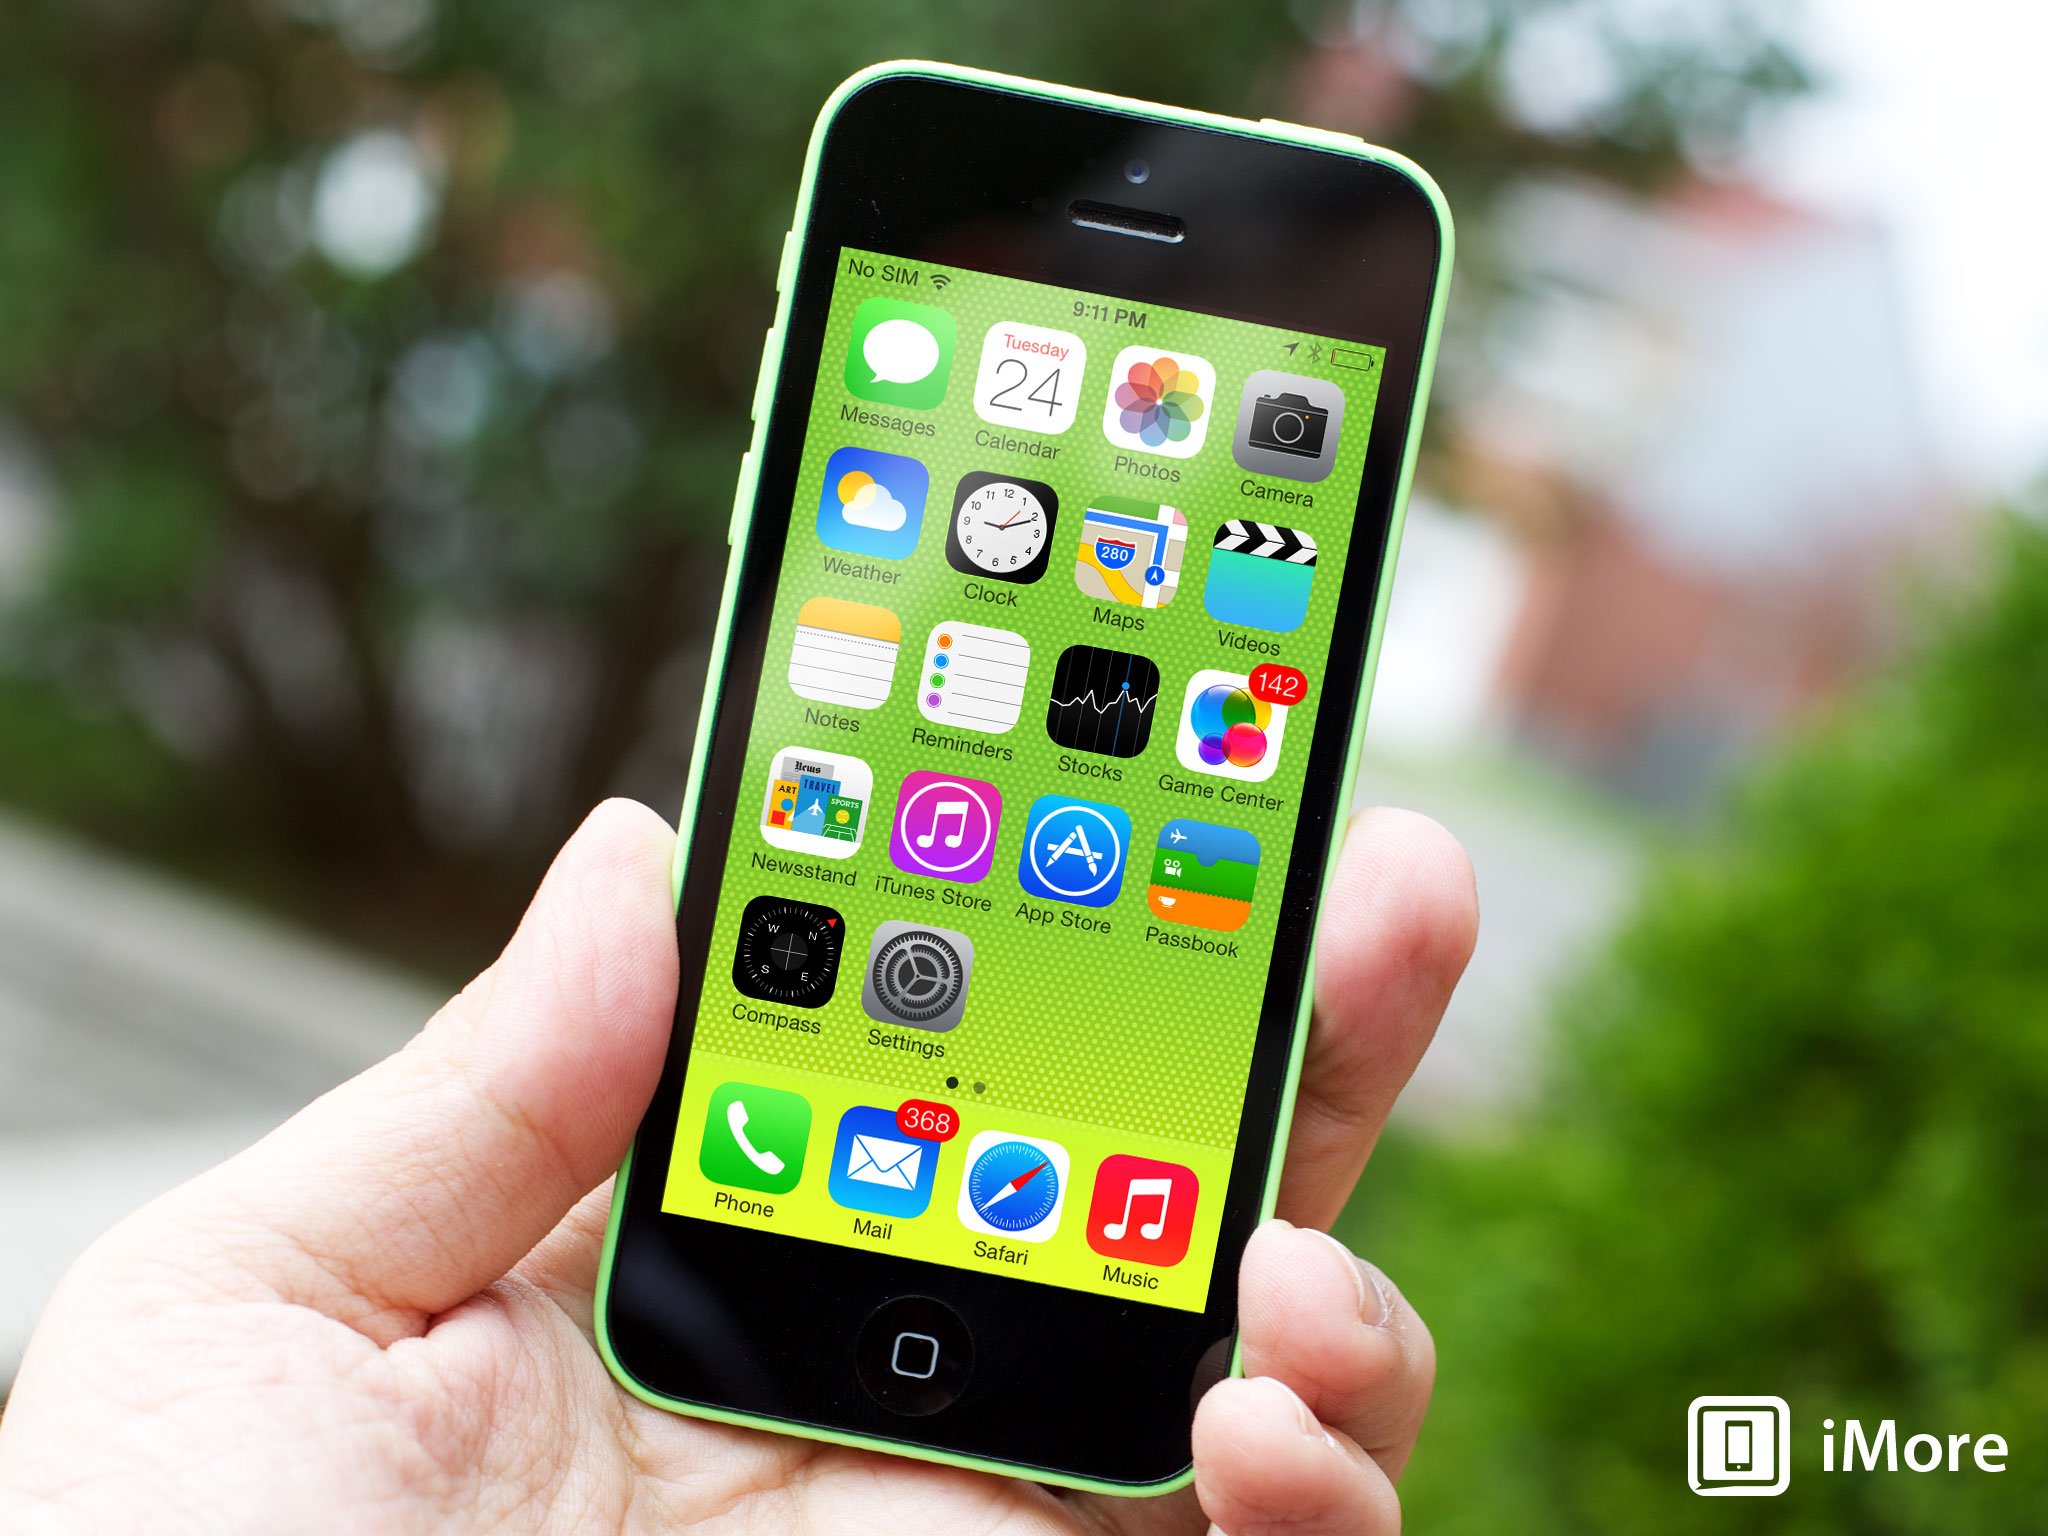 Who should get an iPhone 5c?